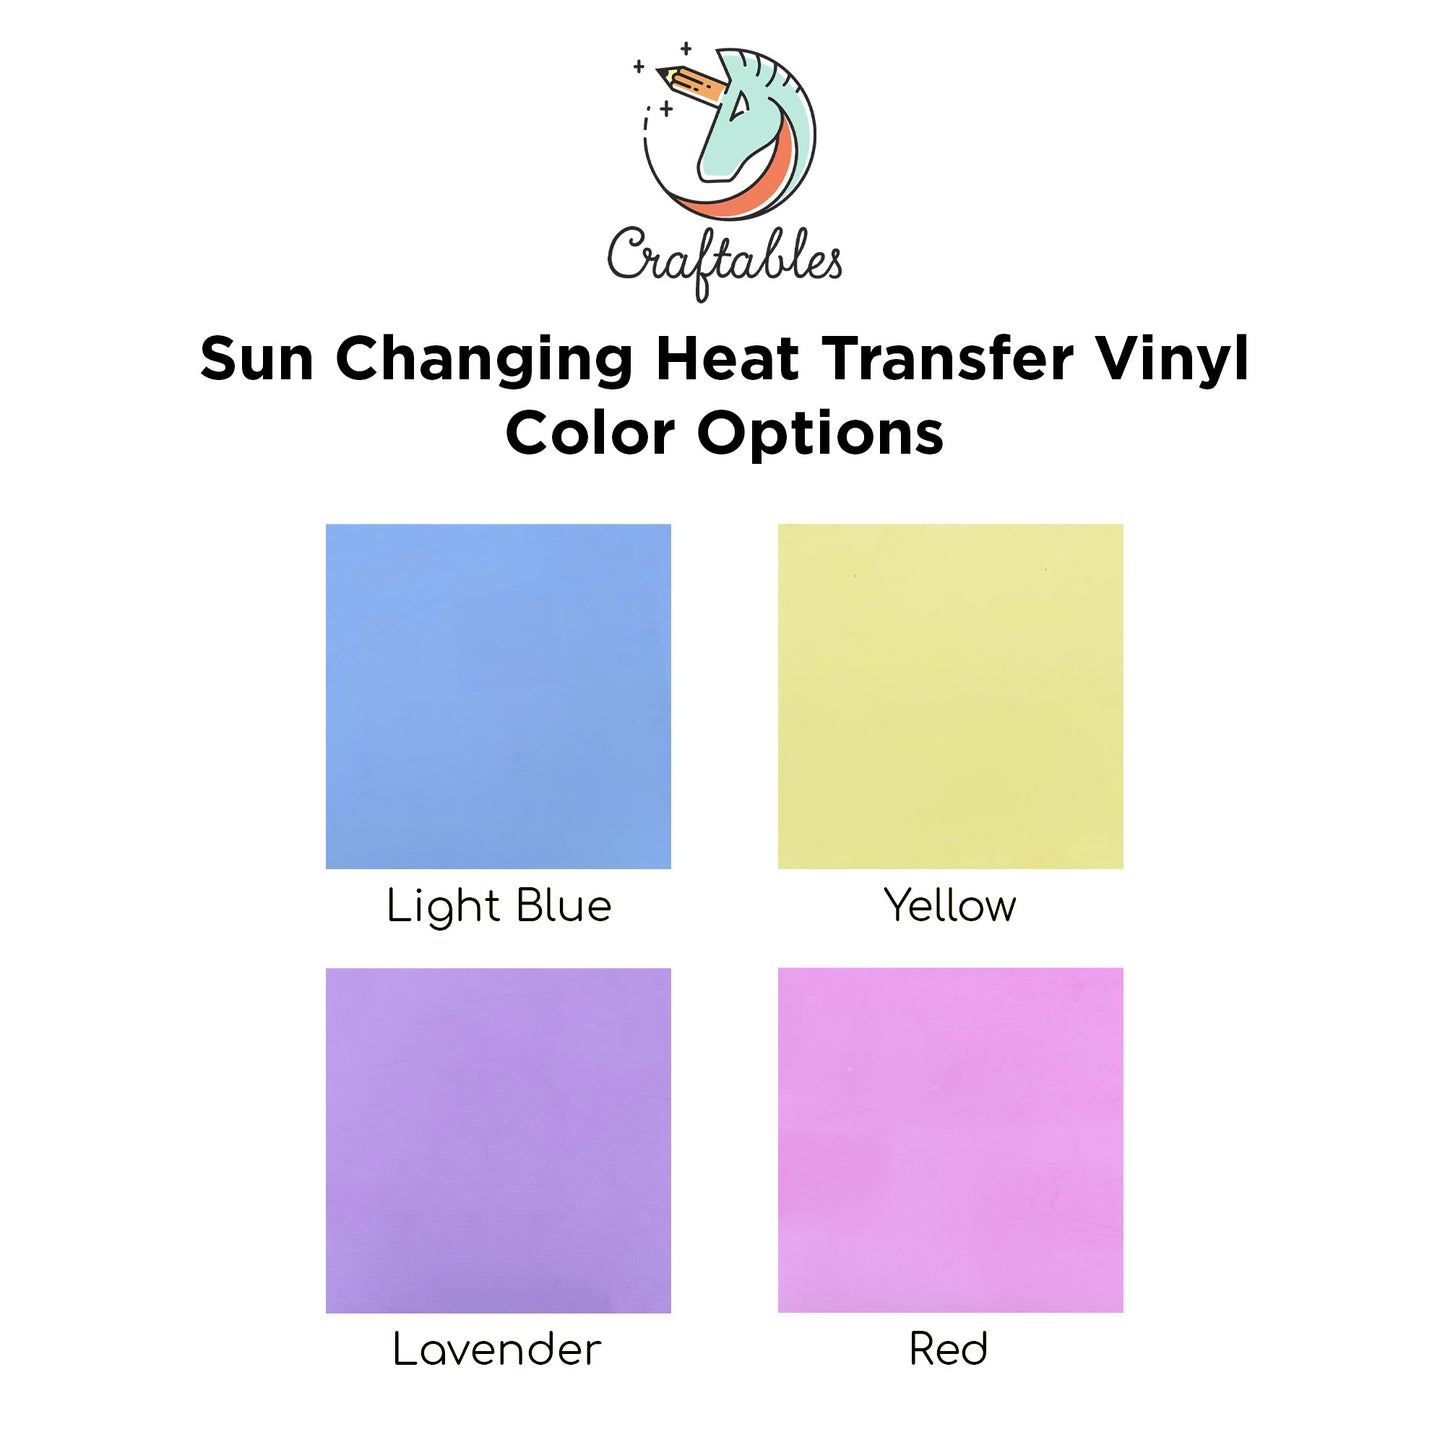 Red Light Changing Heat Transfer Vinyl Sheets By Craftables